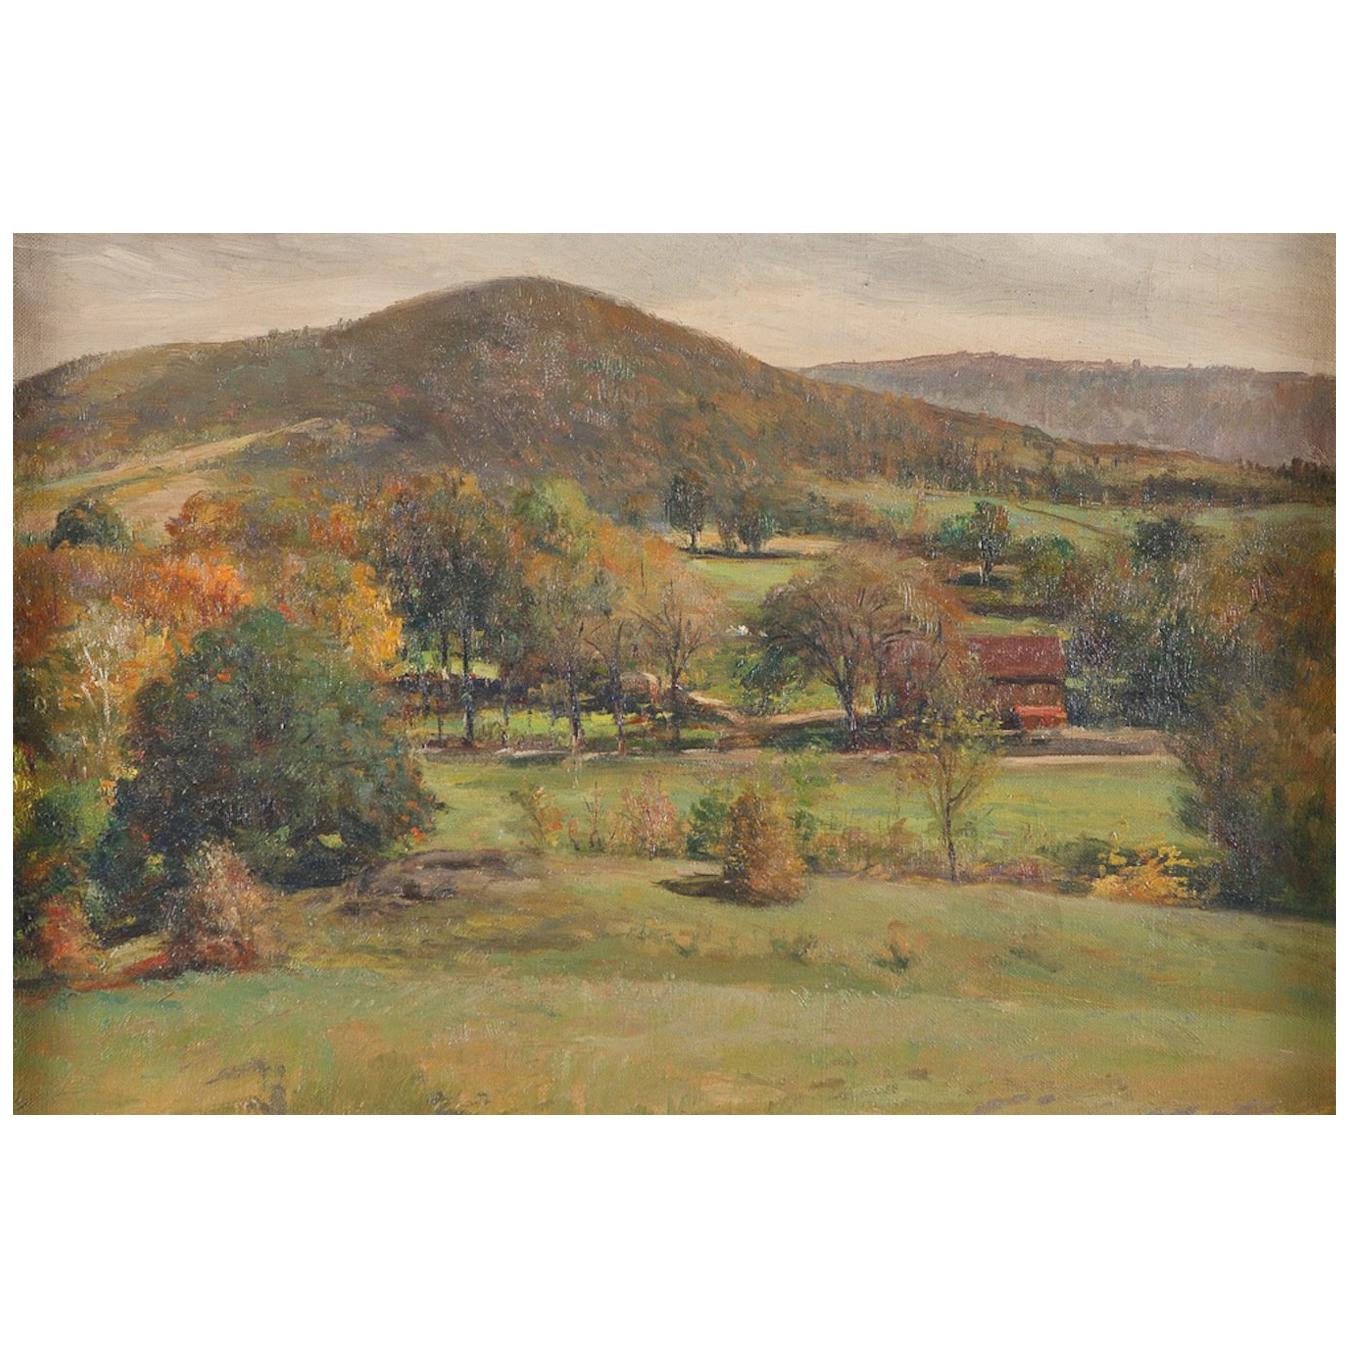 Autumn landscape with hills in the background and a red barn in a field, studded by trees, in the foreground. Signed on bottom right (hard to read). Oil on canvas, with distressed, original carved and painted wood frame.

Measurements: 25